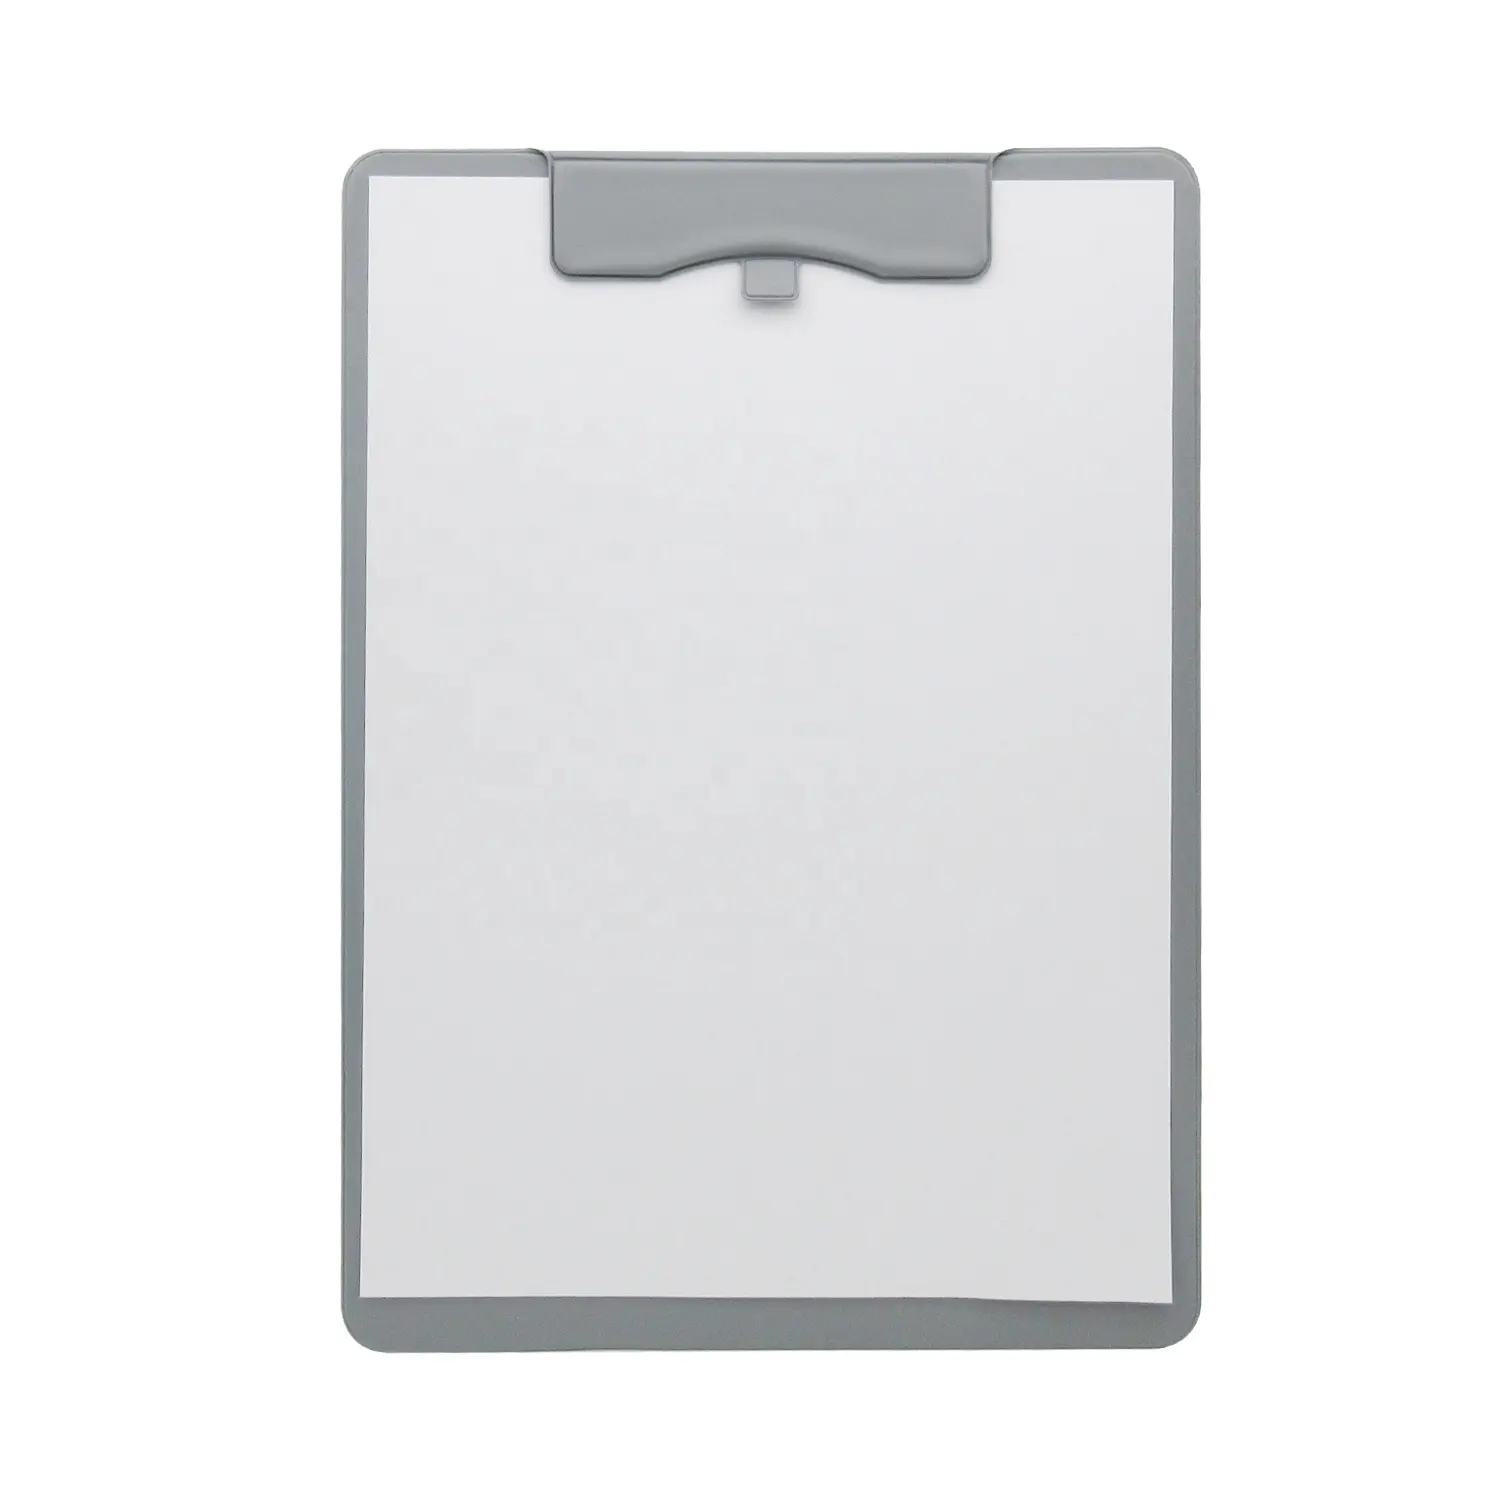 Pvc Clipboard China Factory Price Office School Hotel PVC Cover Waterproof Slim Clip Board Plastic A4 Size Magnetic Clipboard